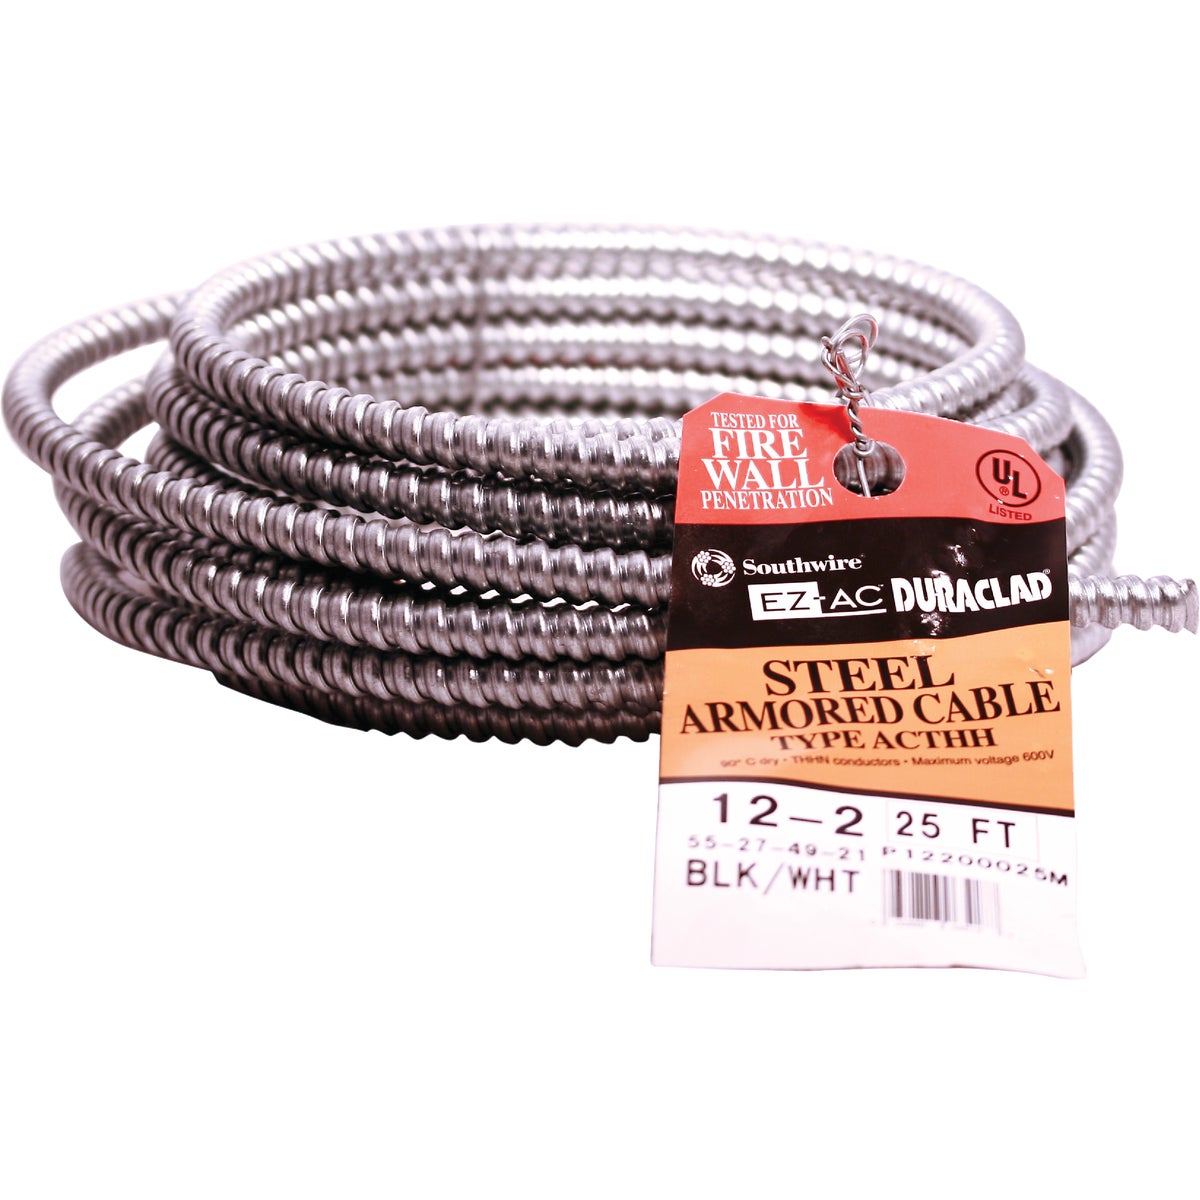 Southwire 55274921 Southwire 25 Ft. 12/2 AC Armored Cable Electrical Wire 55274921